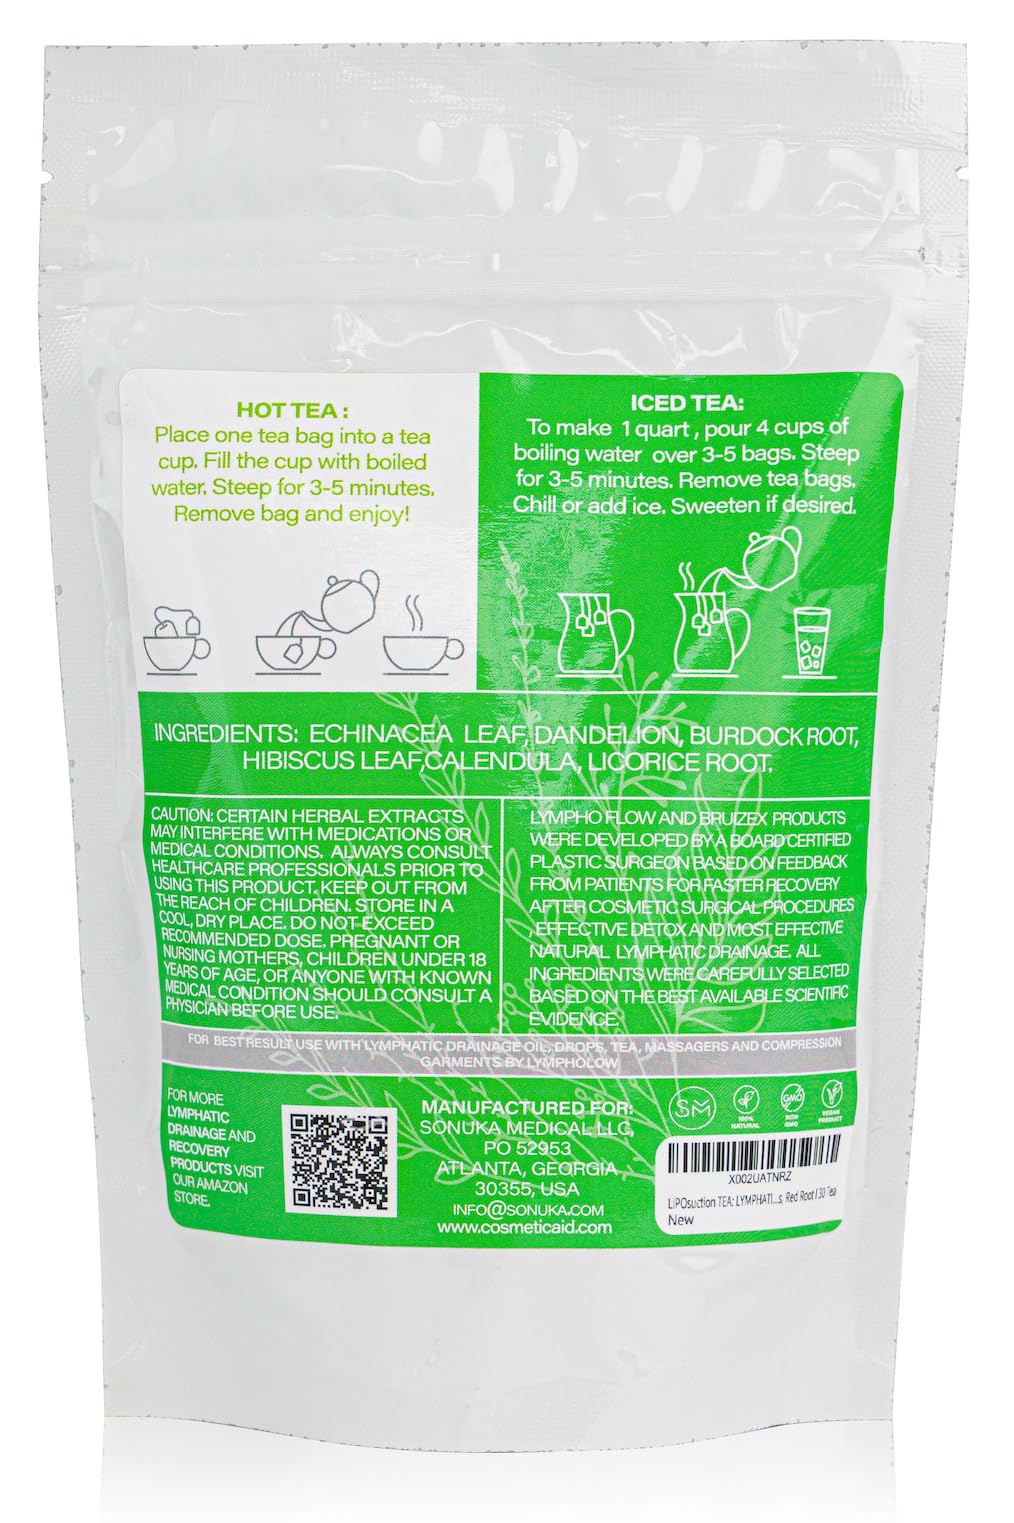 LIPOsuction Tea: Lymphatic Drainage Natural Herbal Tea Blend, For Lymphatic System Recovery, Water Retention Relief, Post Surgery BBL & Tummy Tuck, Dandelion Root, Burdock Root, 30-Pack